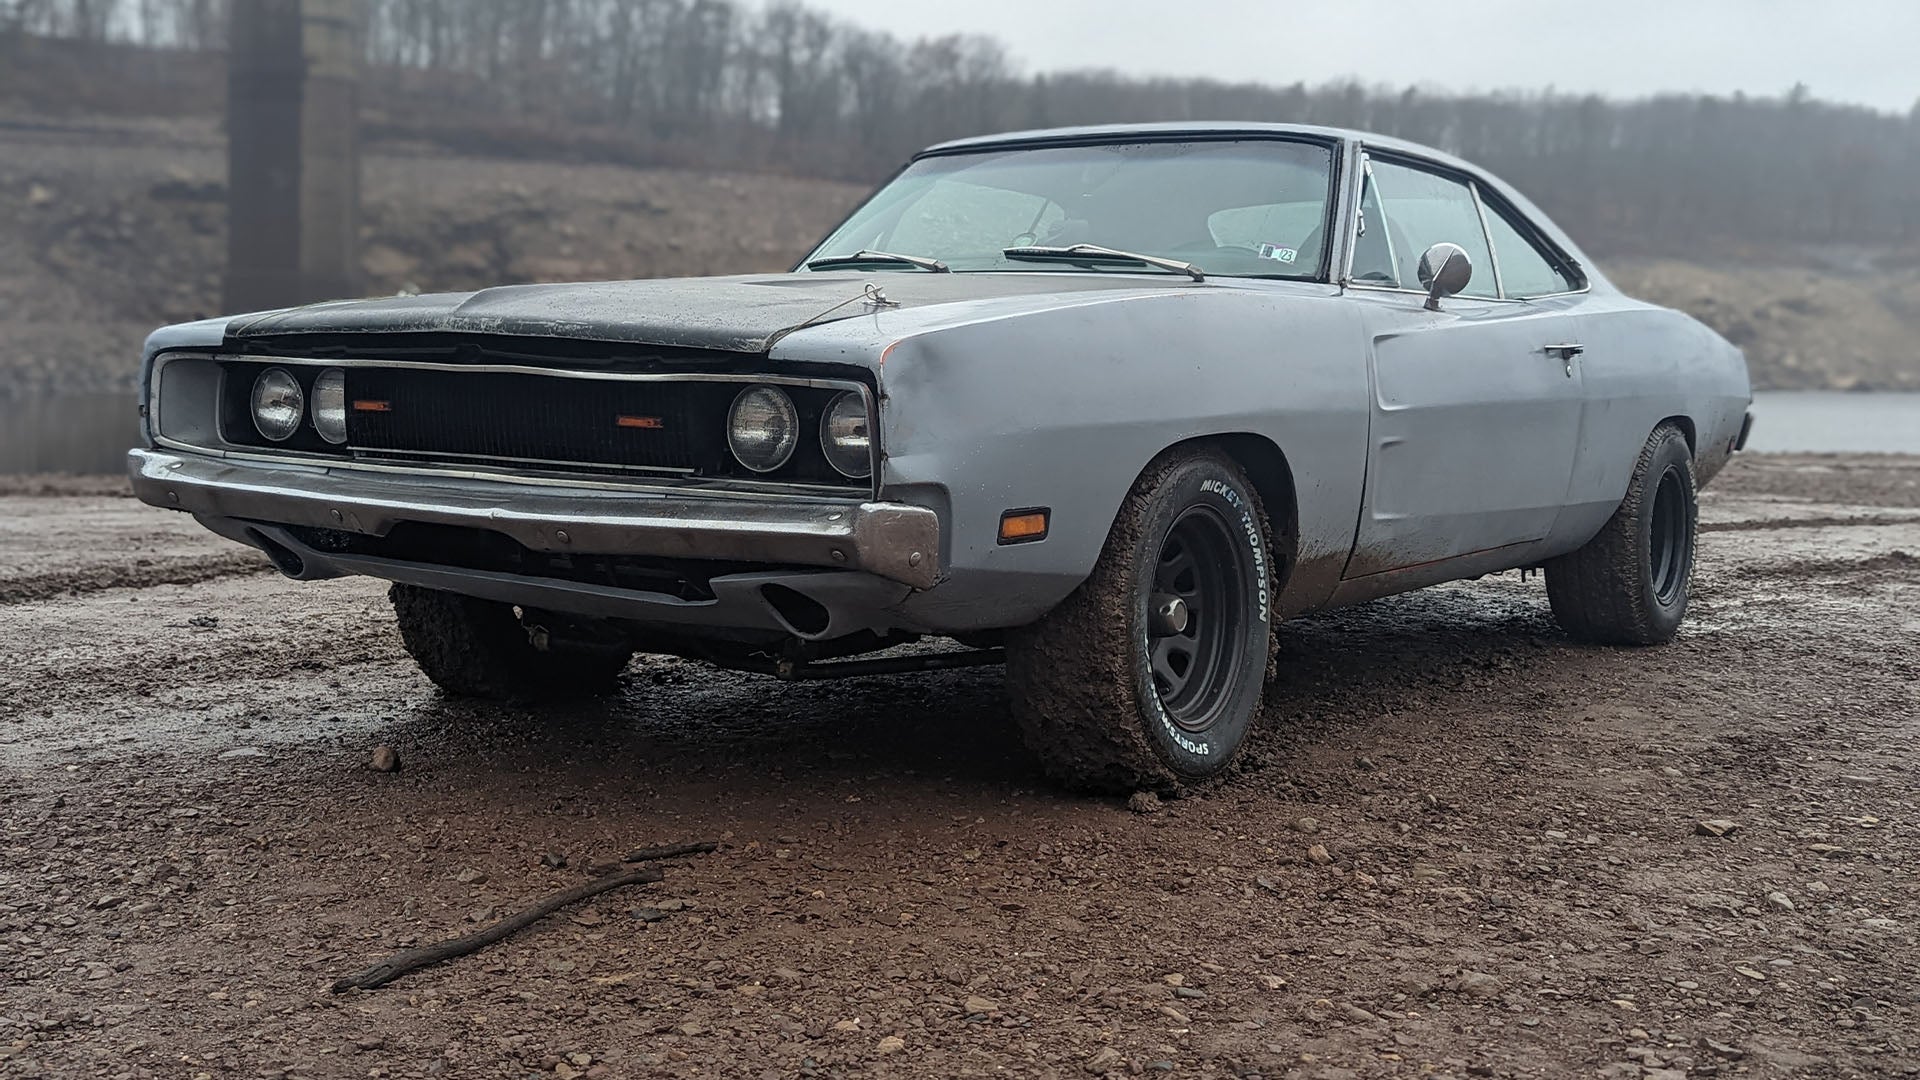 1969 Dodge Charger Project Update: Intake Fixes and Collecting Parts